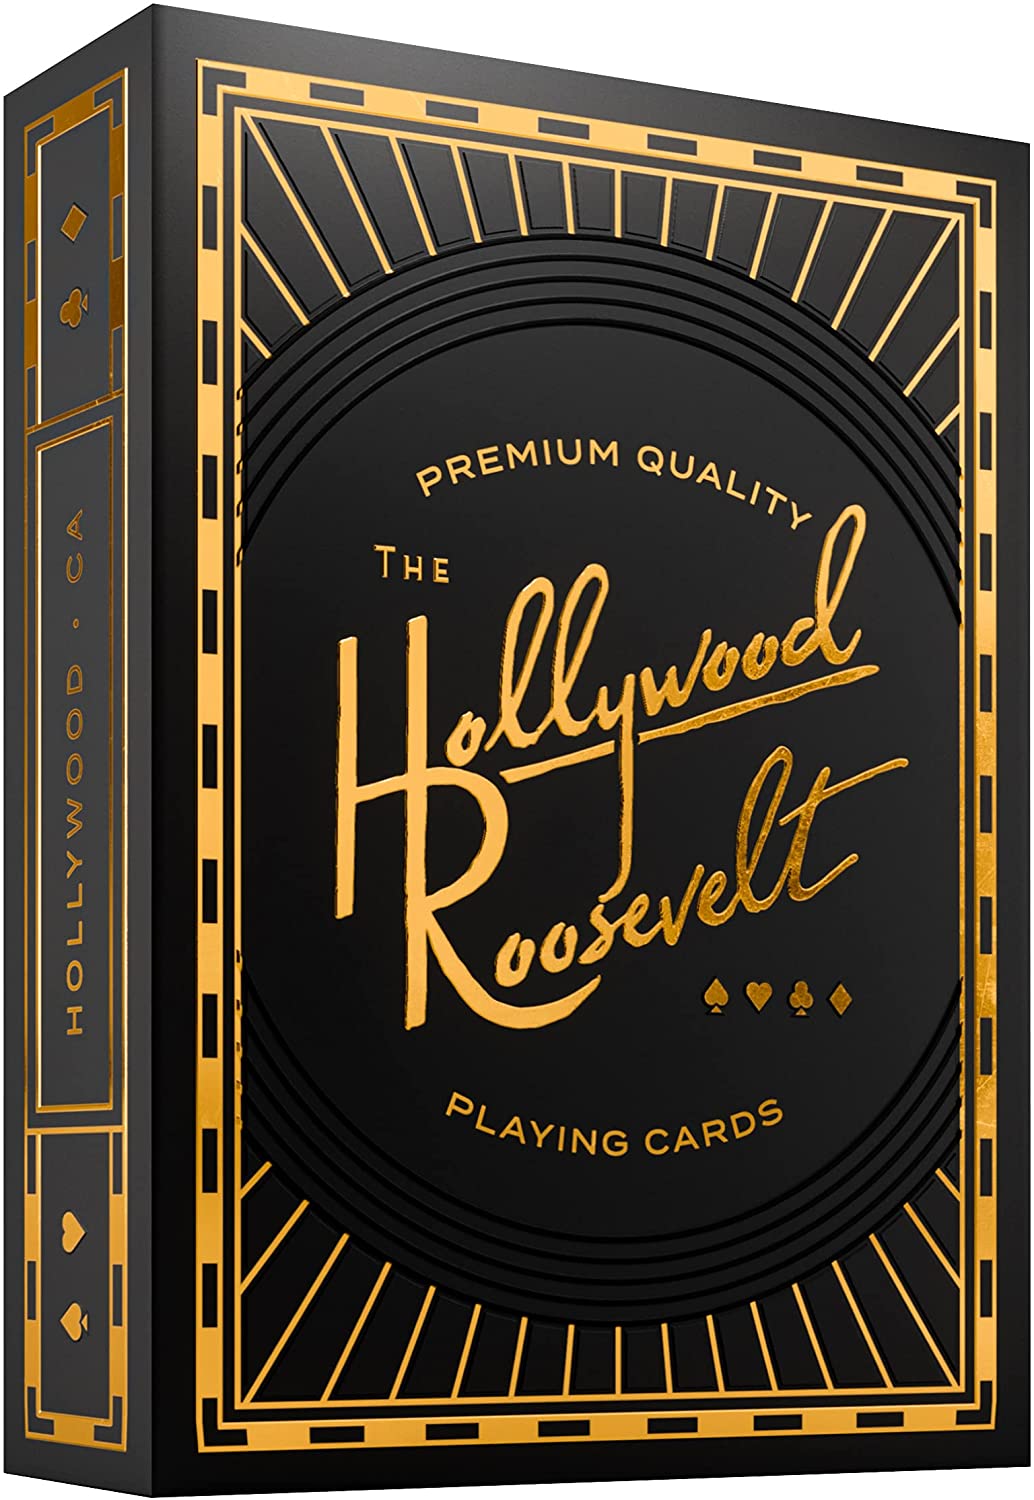 Theory11 Playing Cards: Hollywood Roosevelt